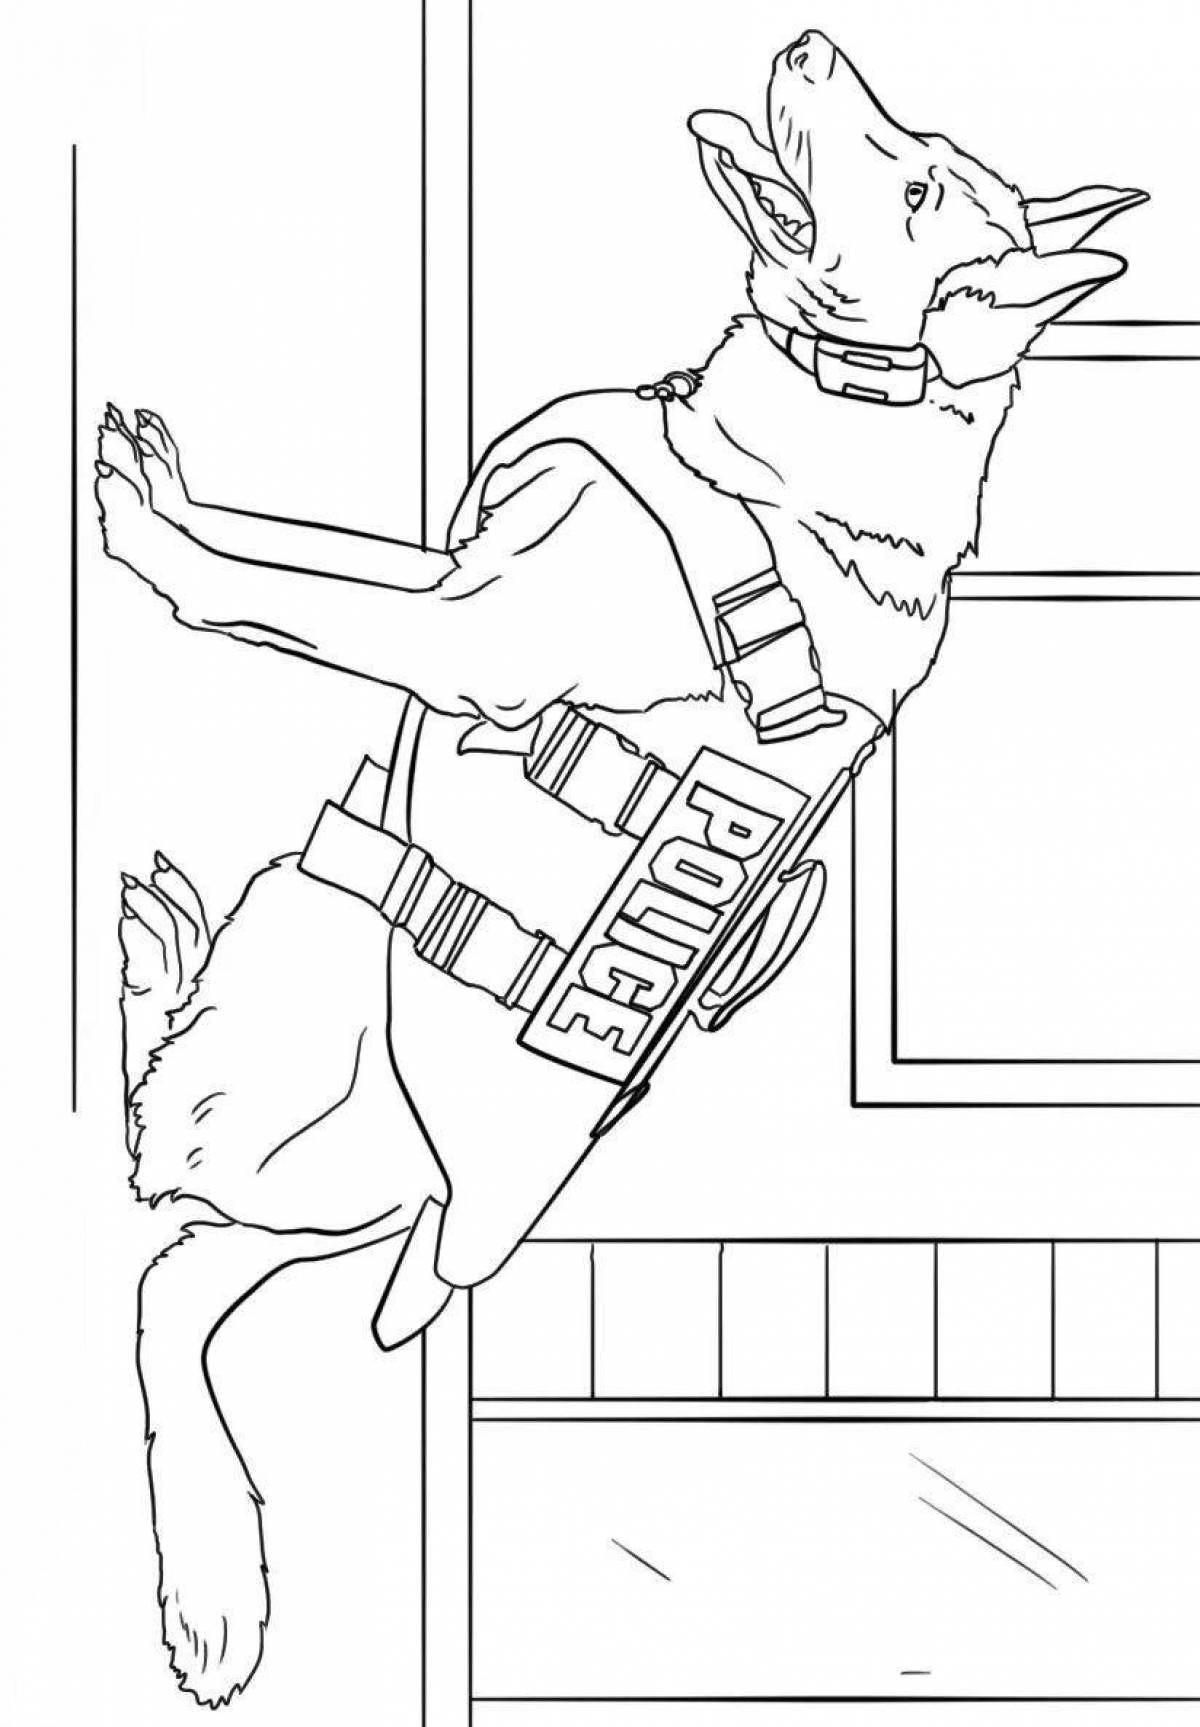 Coloring page sports police dog